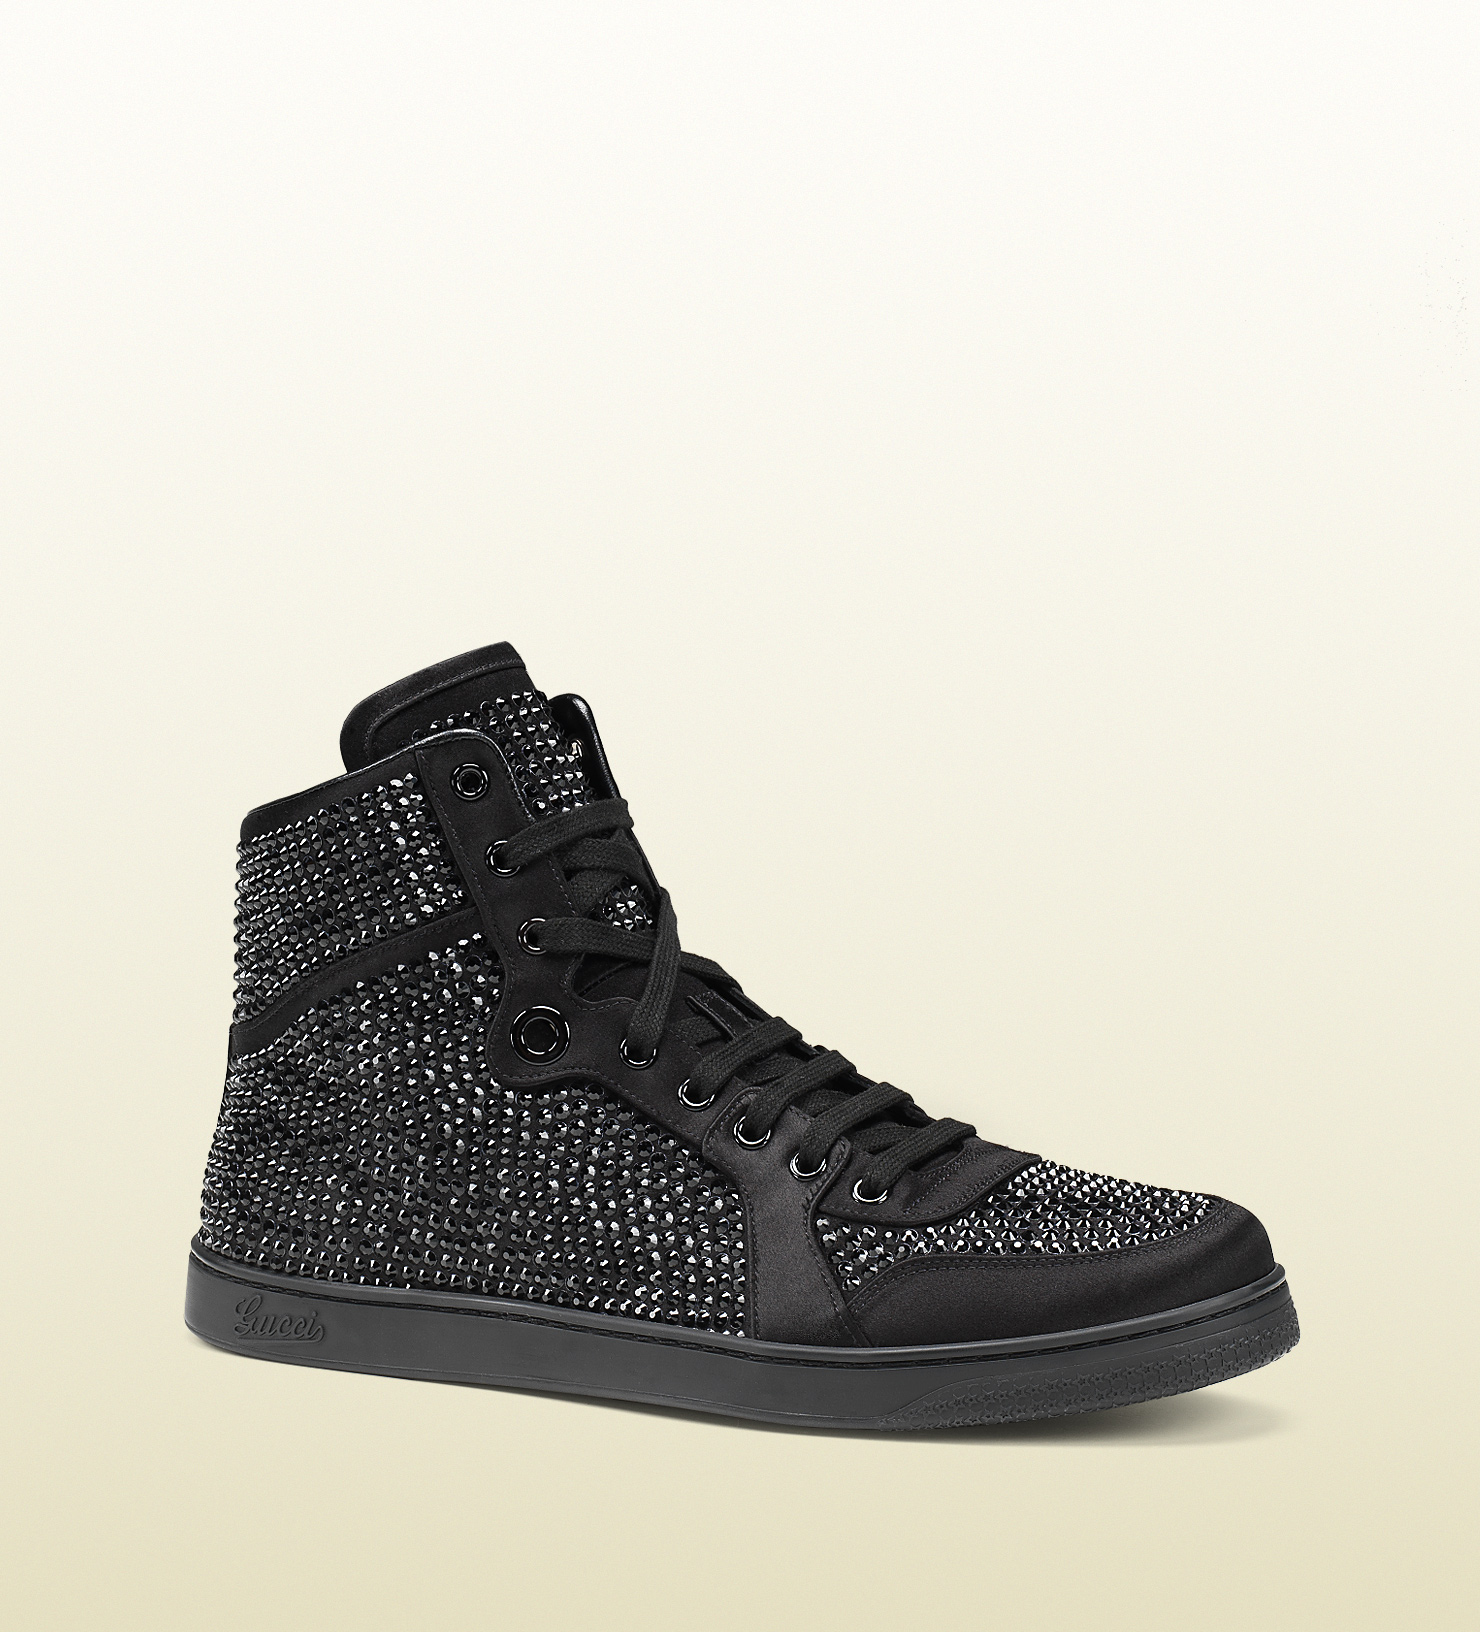 Lyst - Gucci High-top Sneaker With Crystal Studs in Black for Men